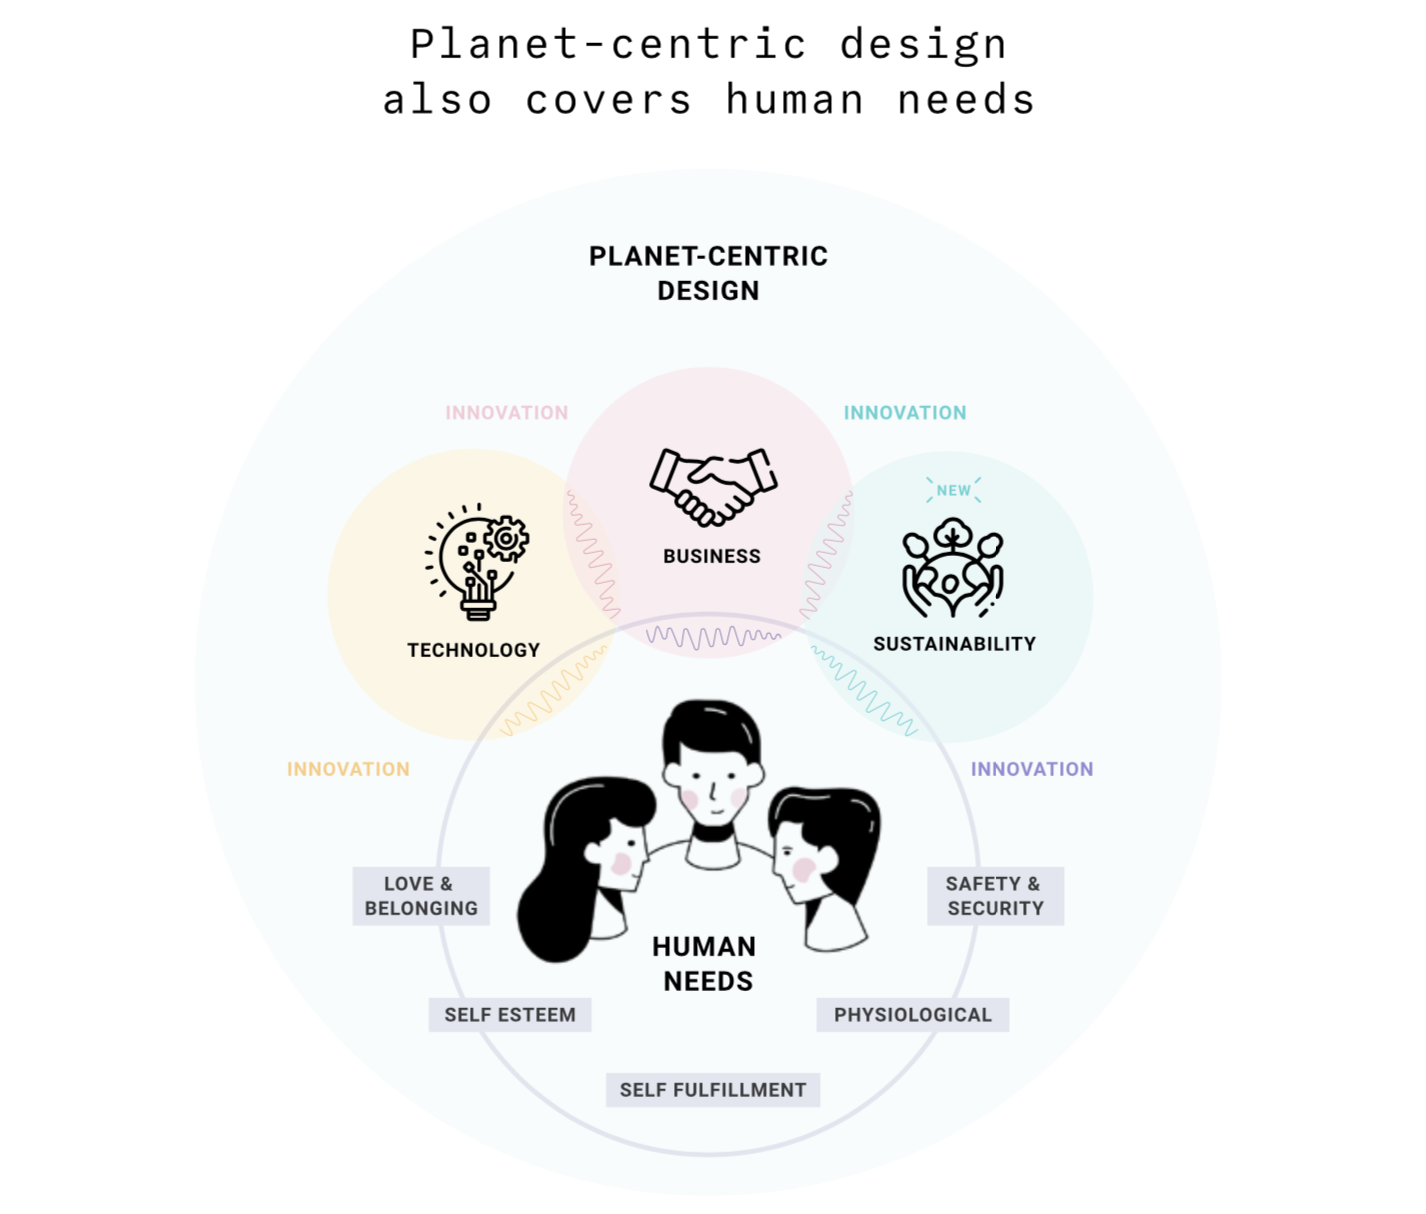 Planet-centric design also covers human needs